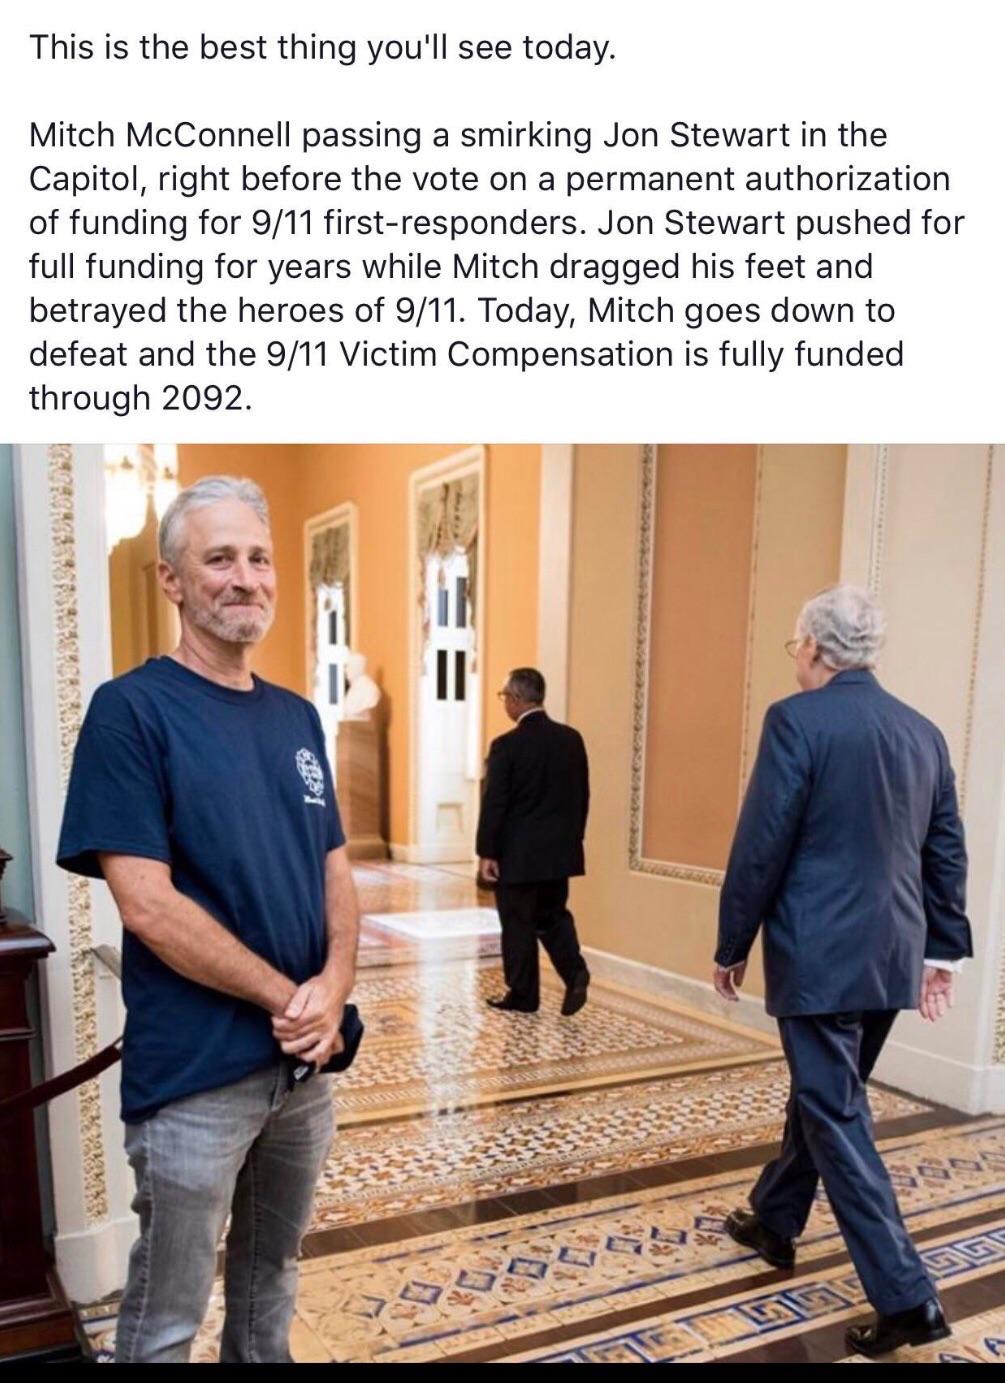 jon stewart mitch mcconnell - This is the best thing you'll see today. Mitch McConnell passing a smirking Jon Stewart in the Capitol, right before the vote on a permanent authorization of funding for 911 firstresponders. Jon Stewart pushed for full fundin